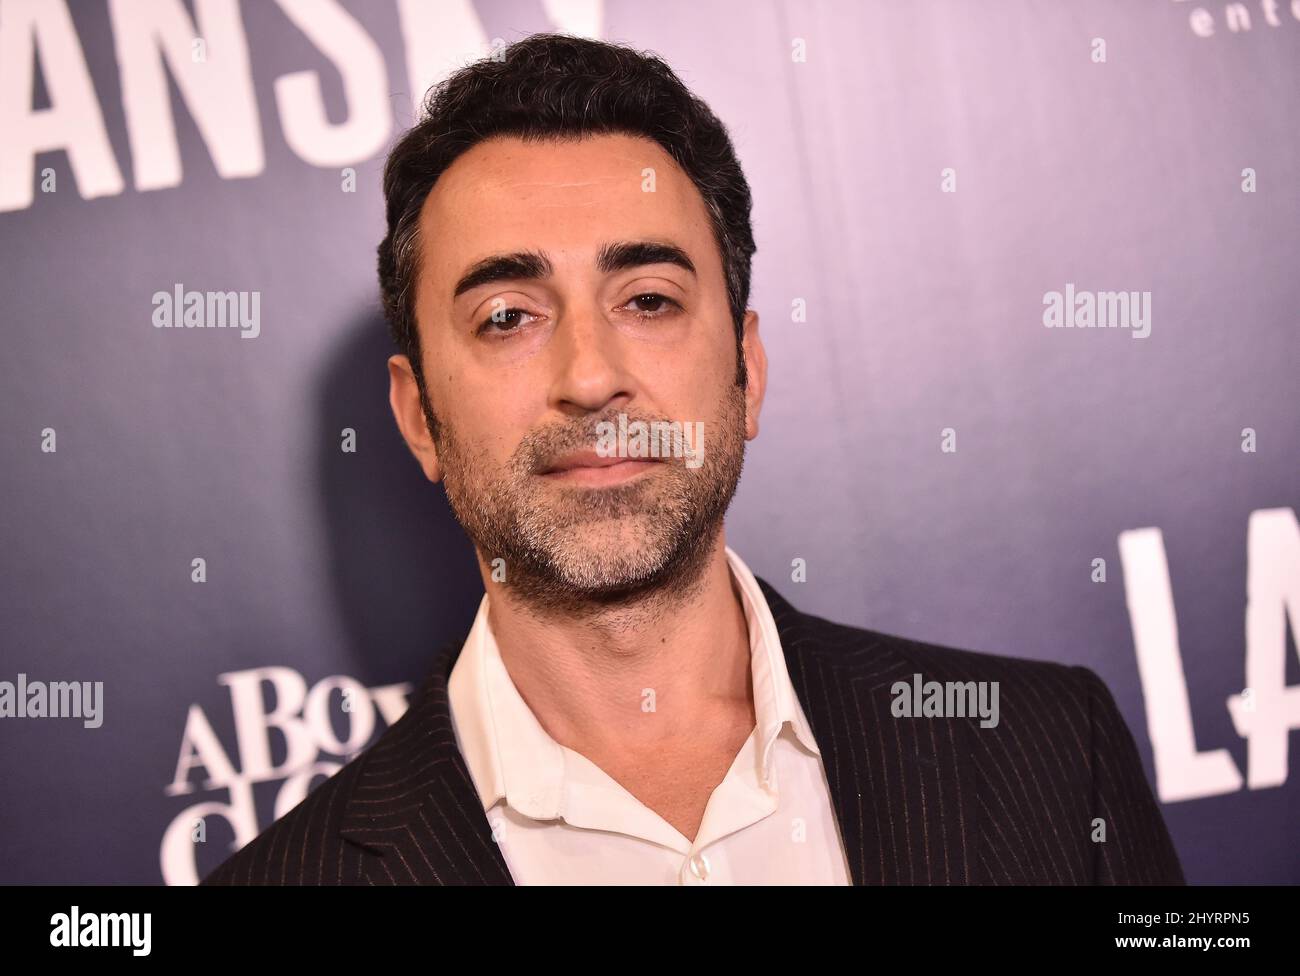 Eytan Rockaway arriving to the Lansky Los Angeles Premiere at Harmony Gold Theater on June 21, 2021 in Los Angeles, CA. Stock Photo